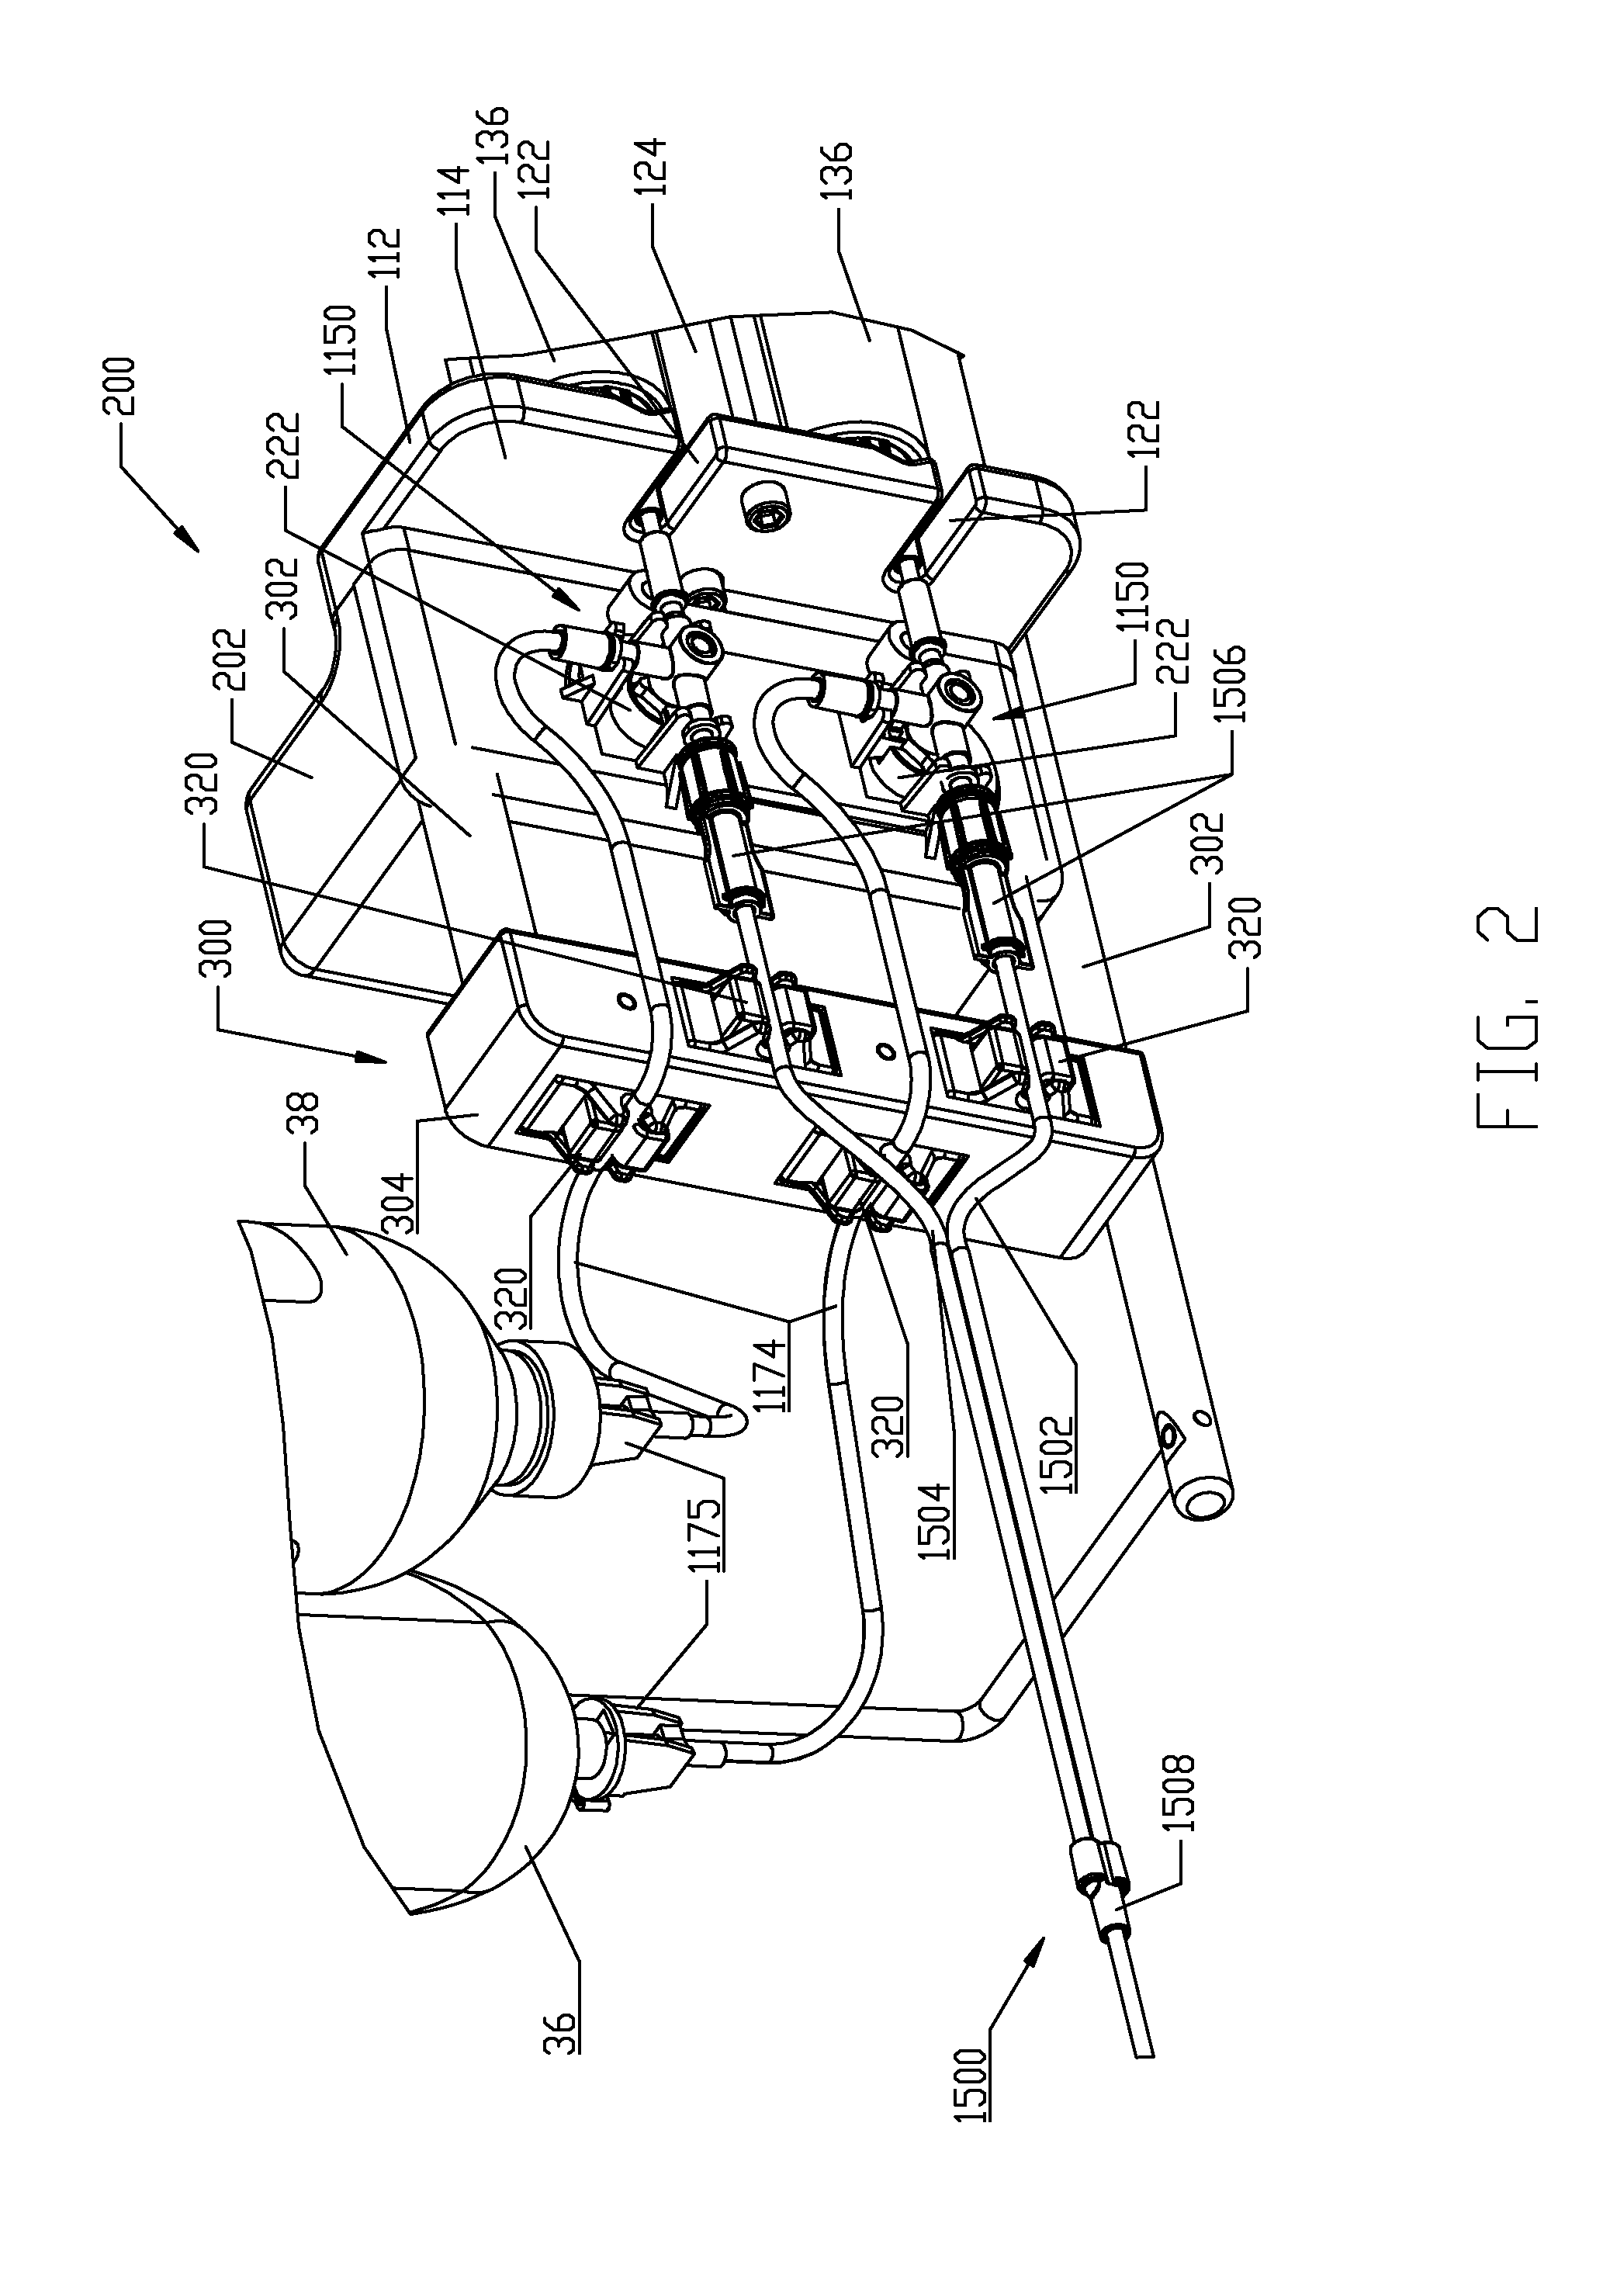 Multi-fluid medical injector system and methods of operation